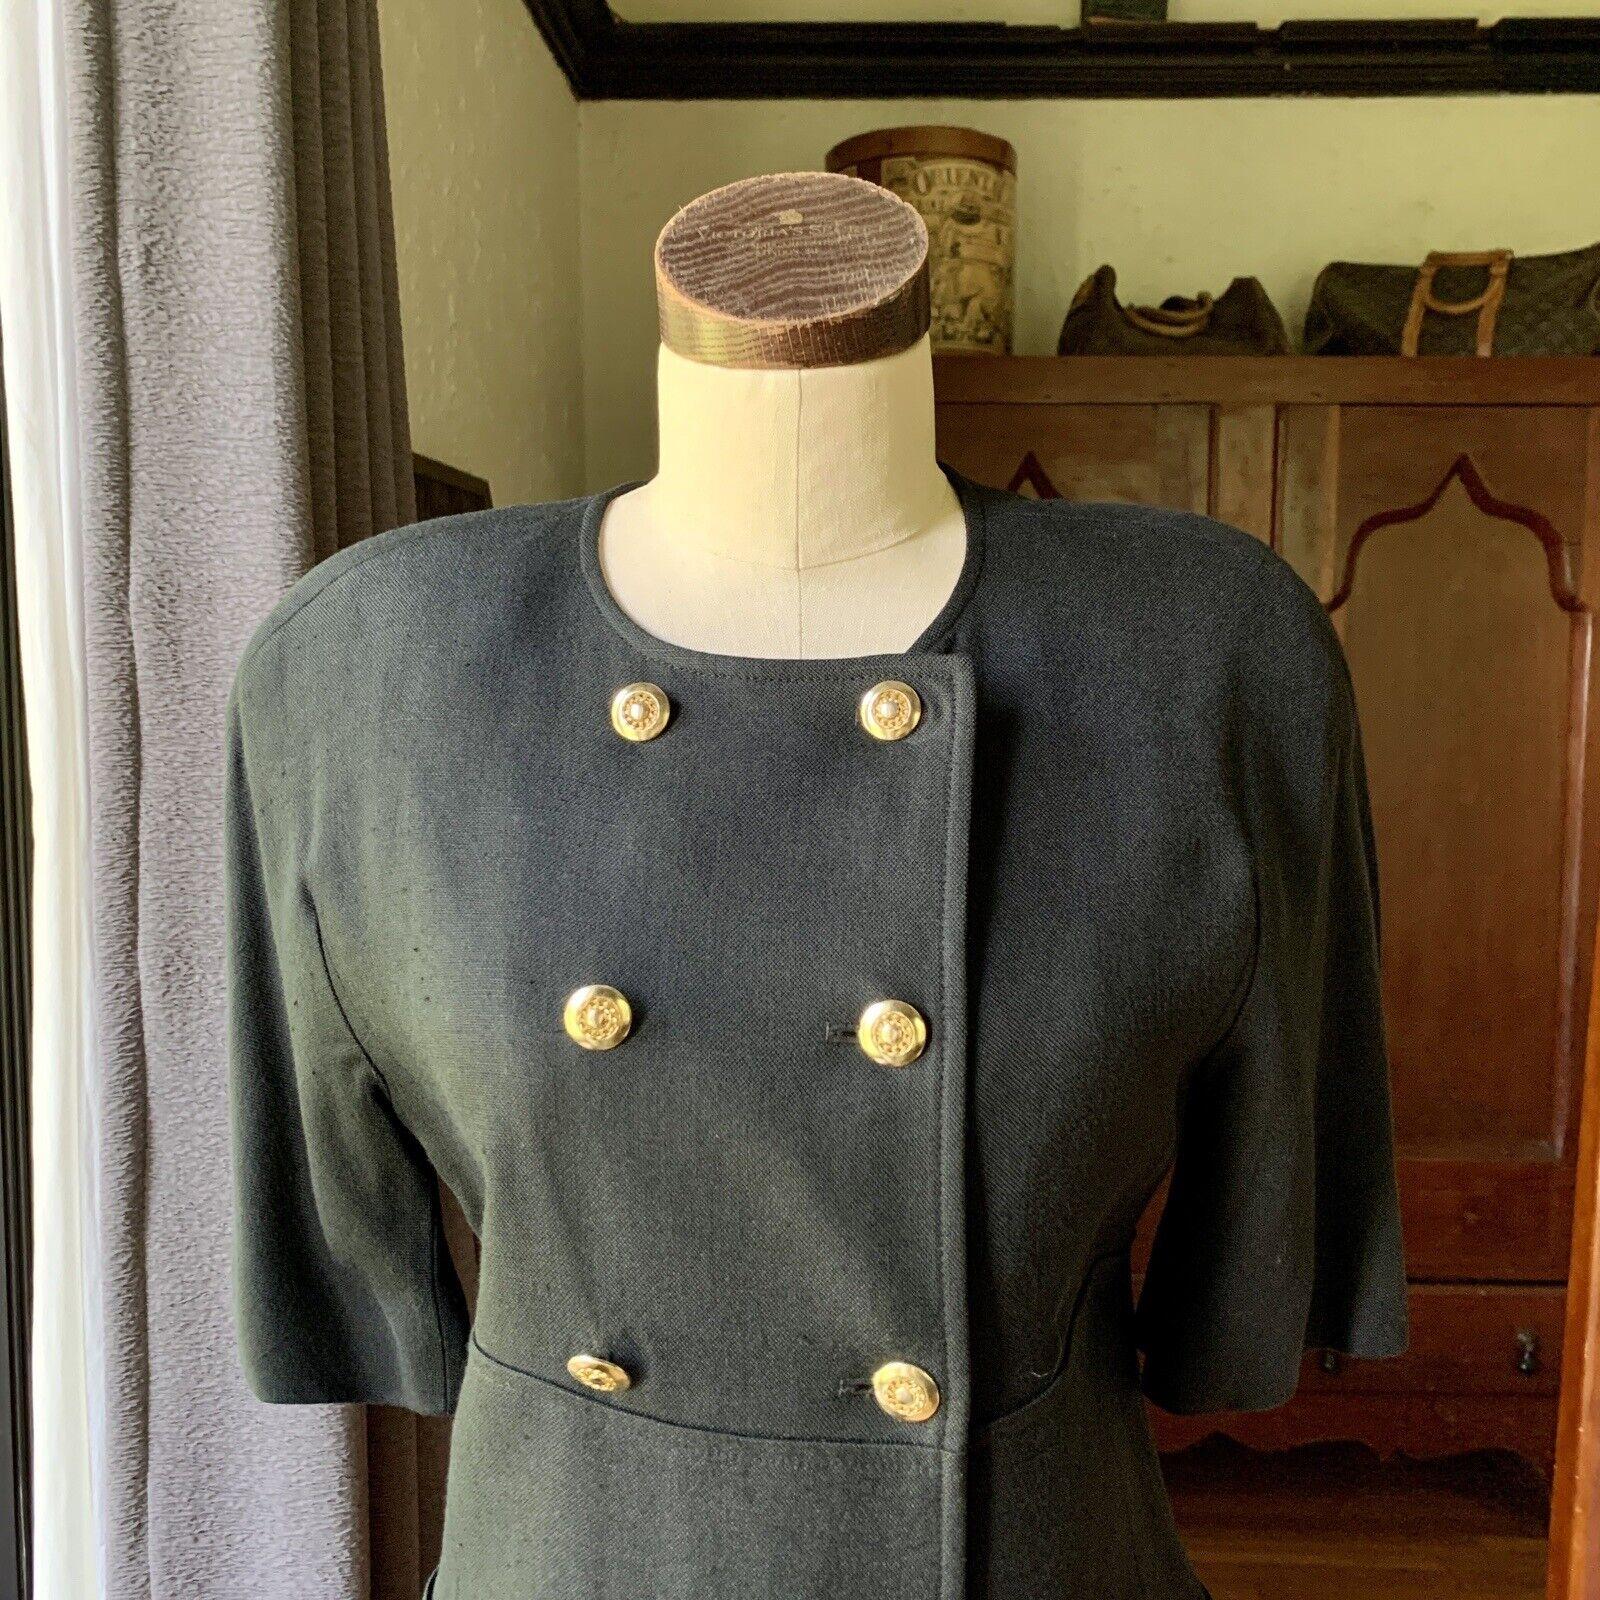 Louis Feraud, Fully Lined, 100% Viscose (Rayon Like)

Jacket - Ten Gold-Tone Buttons, Short Sleeve, Scoop Neckline, Two Shallow Front Pockets, Shoulder Pads

Skirt - Back Zipper with Button

Vintage 6 on Both Pieces.

Measurements Laying Flat

Bust